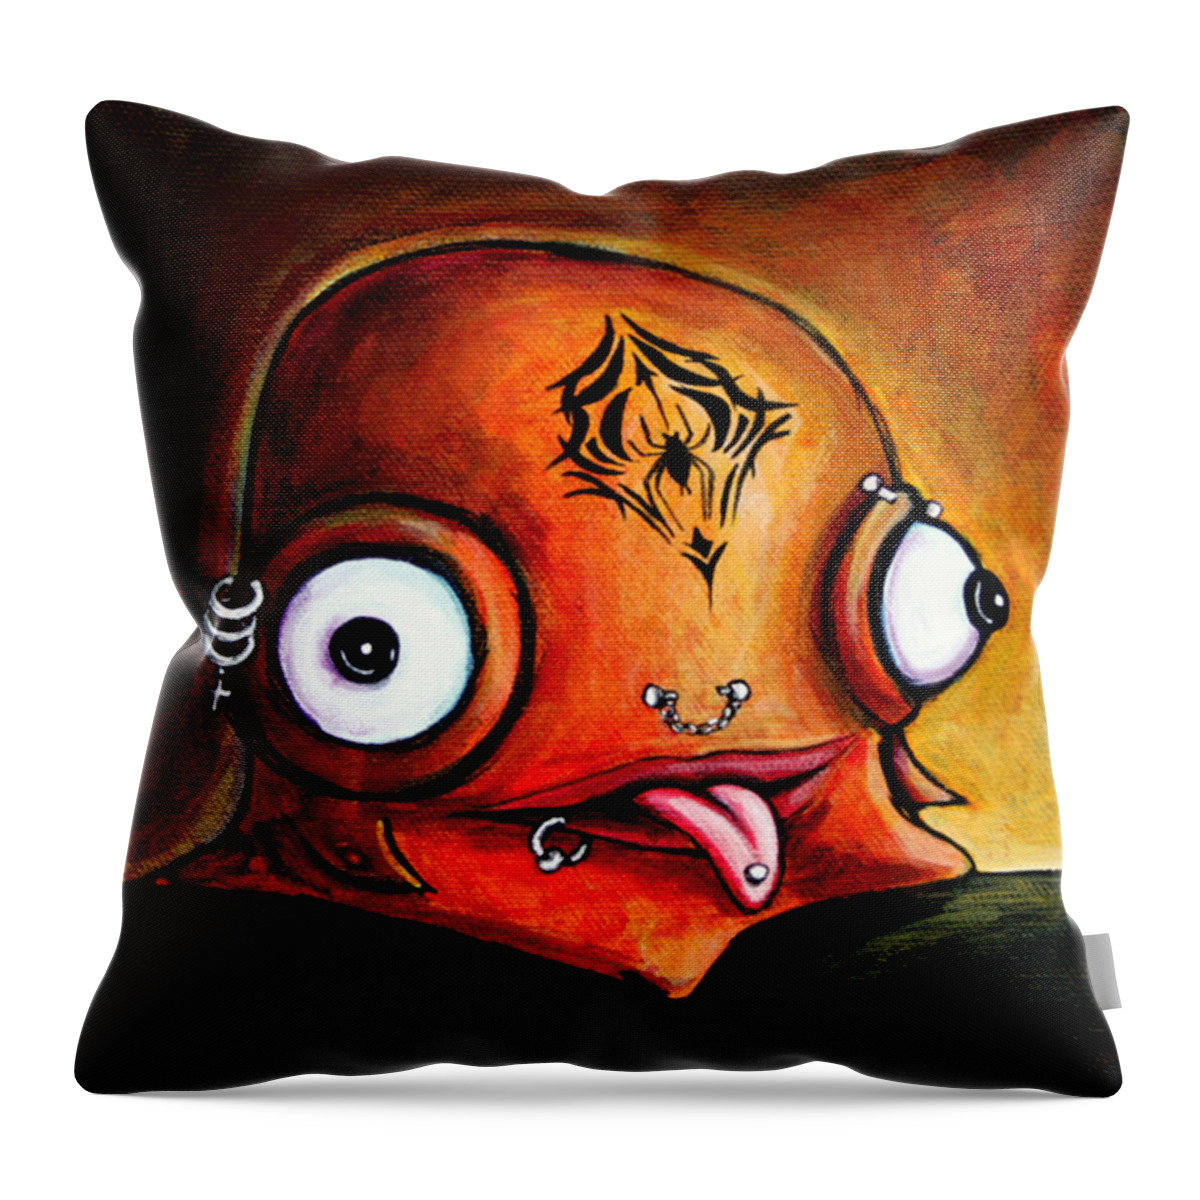 Little Monster Throw Pillow featuring the painting Bad Boy Glob #1 by Leanne Wilkes